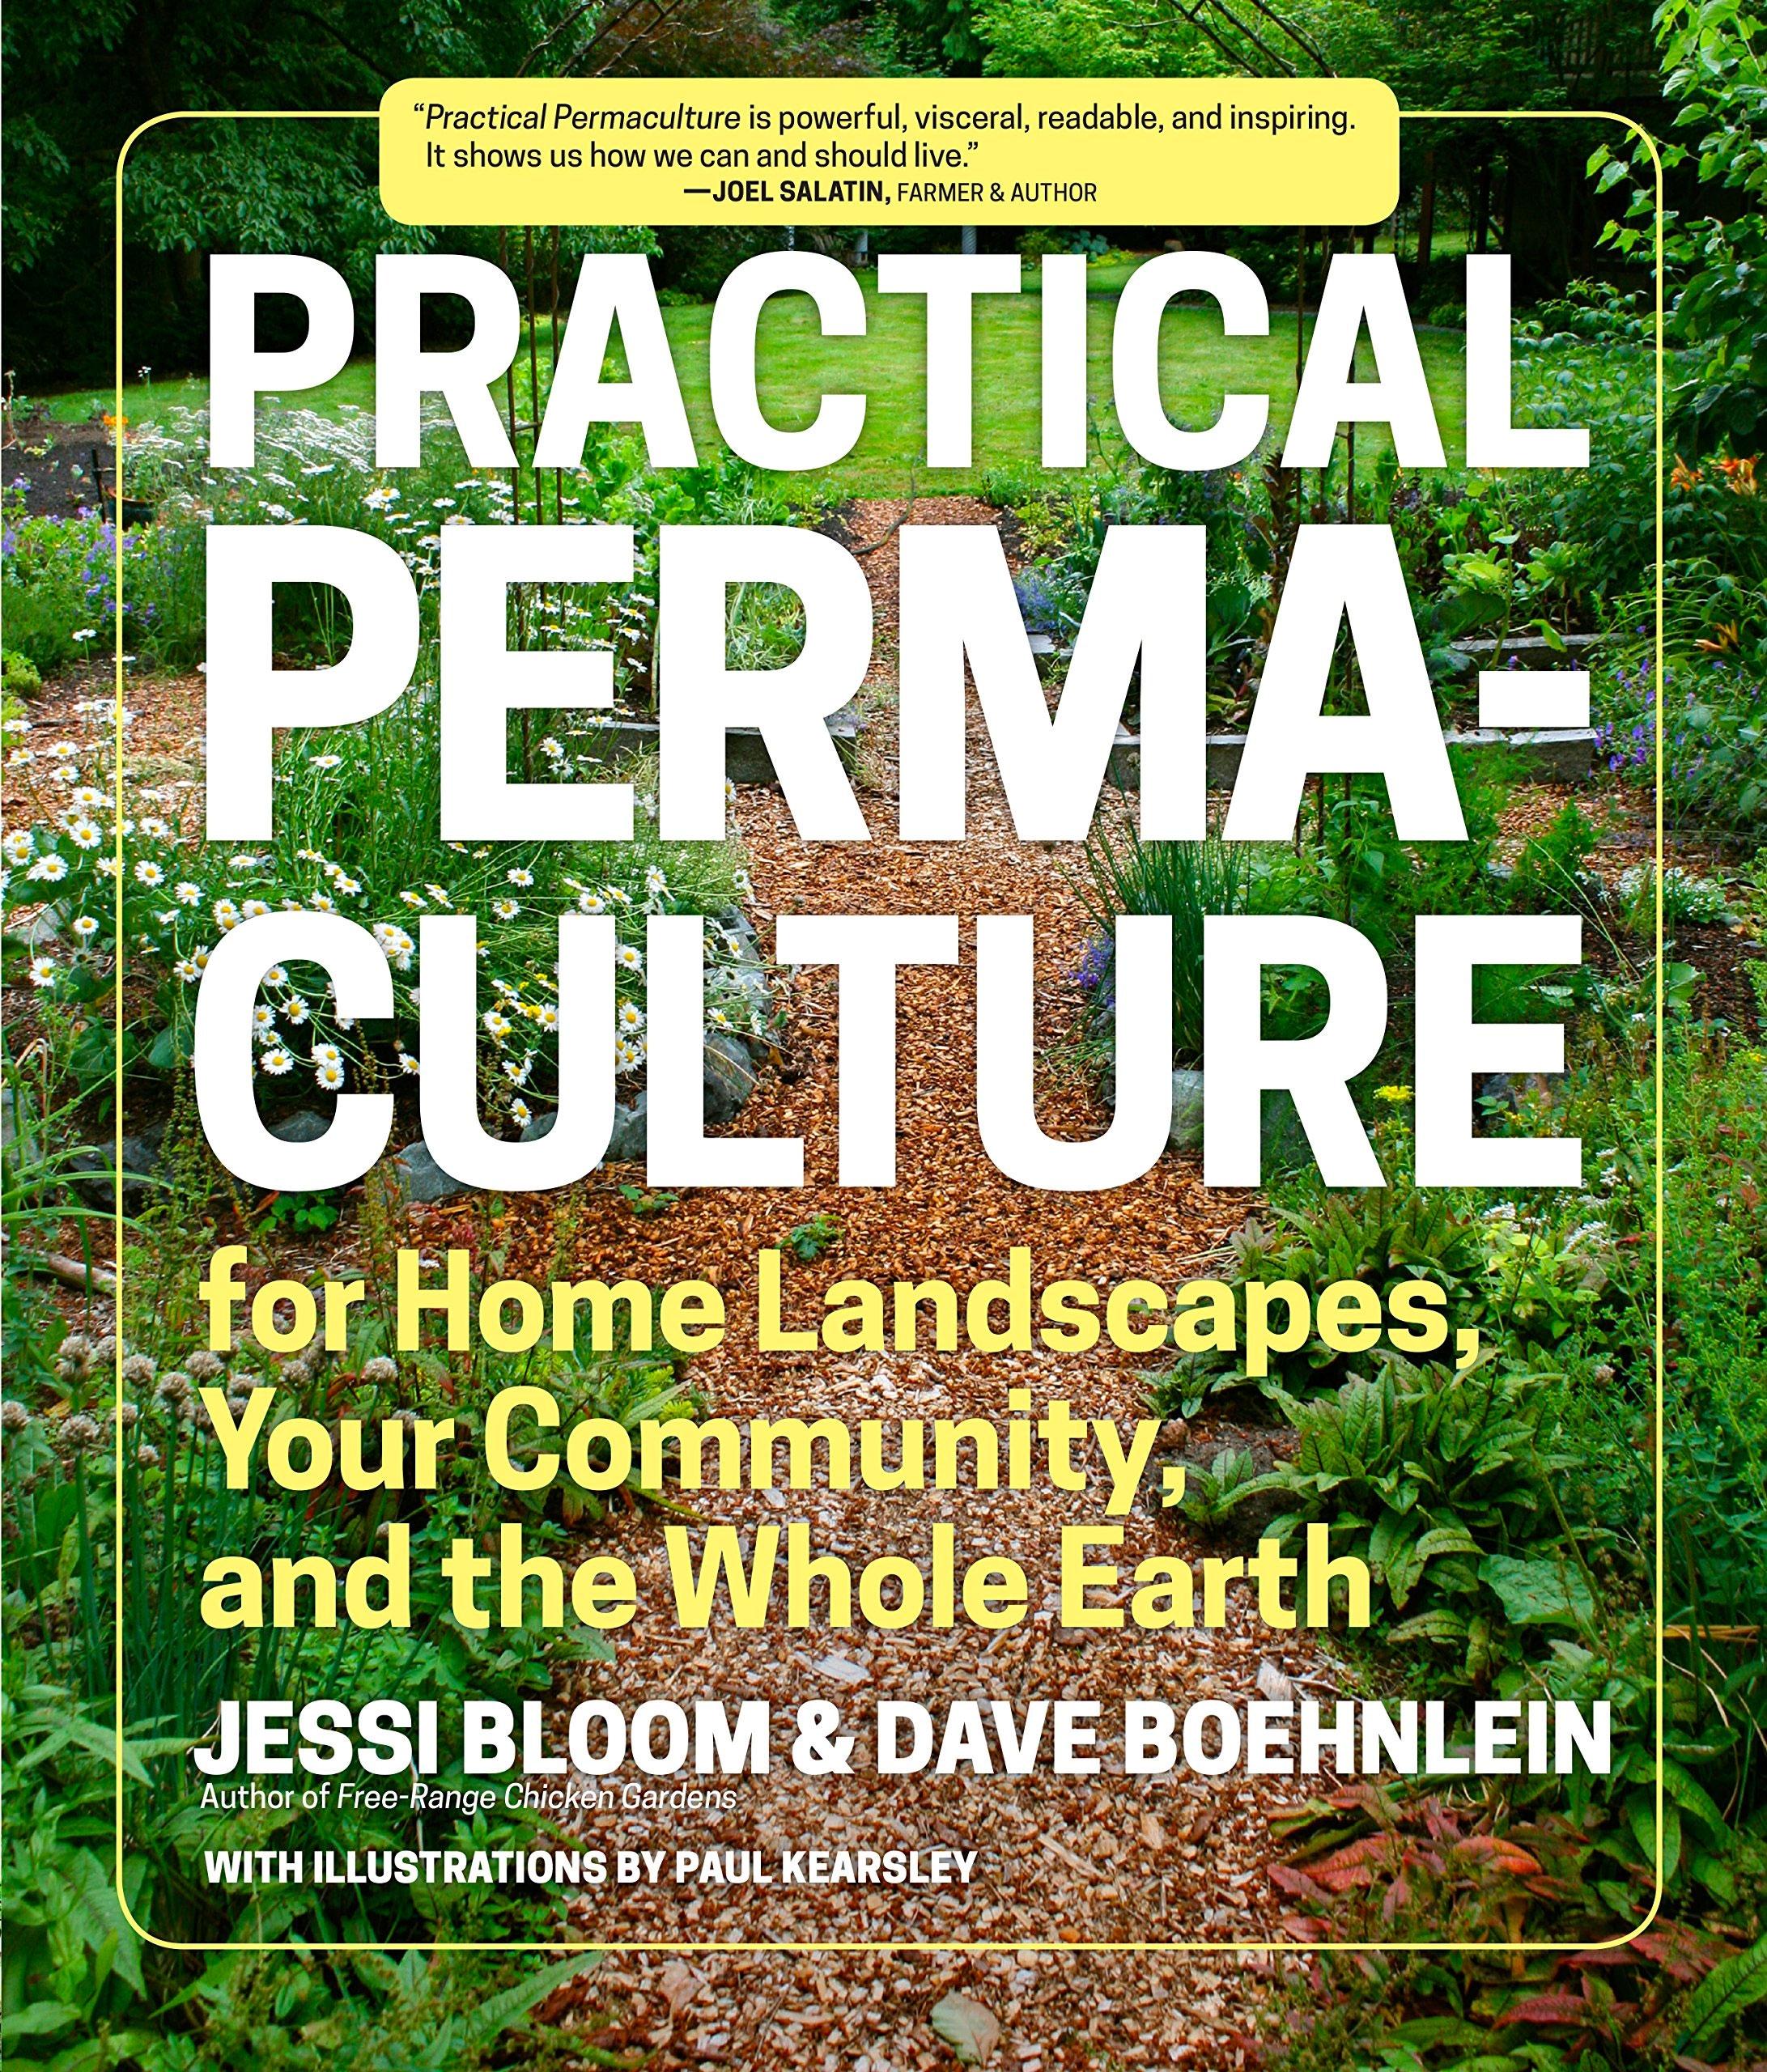 Practical Permaculture